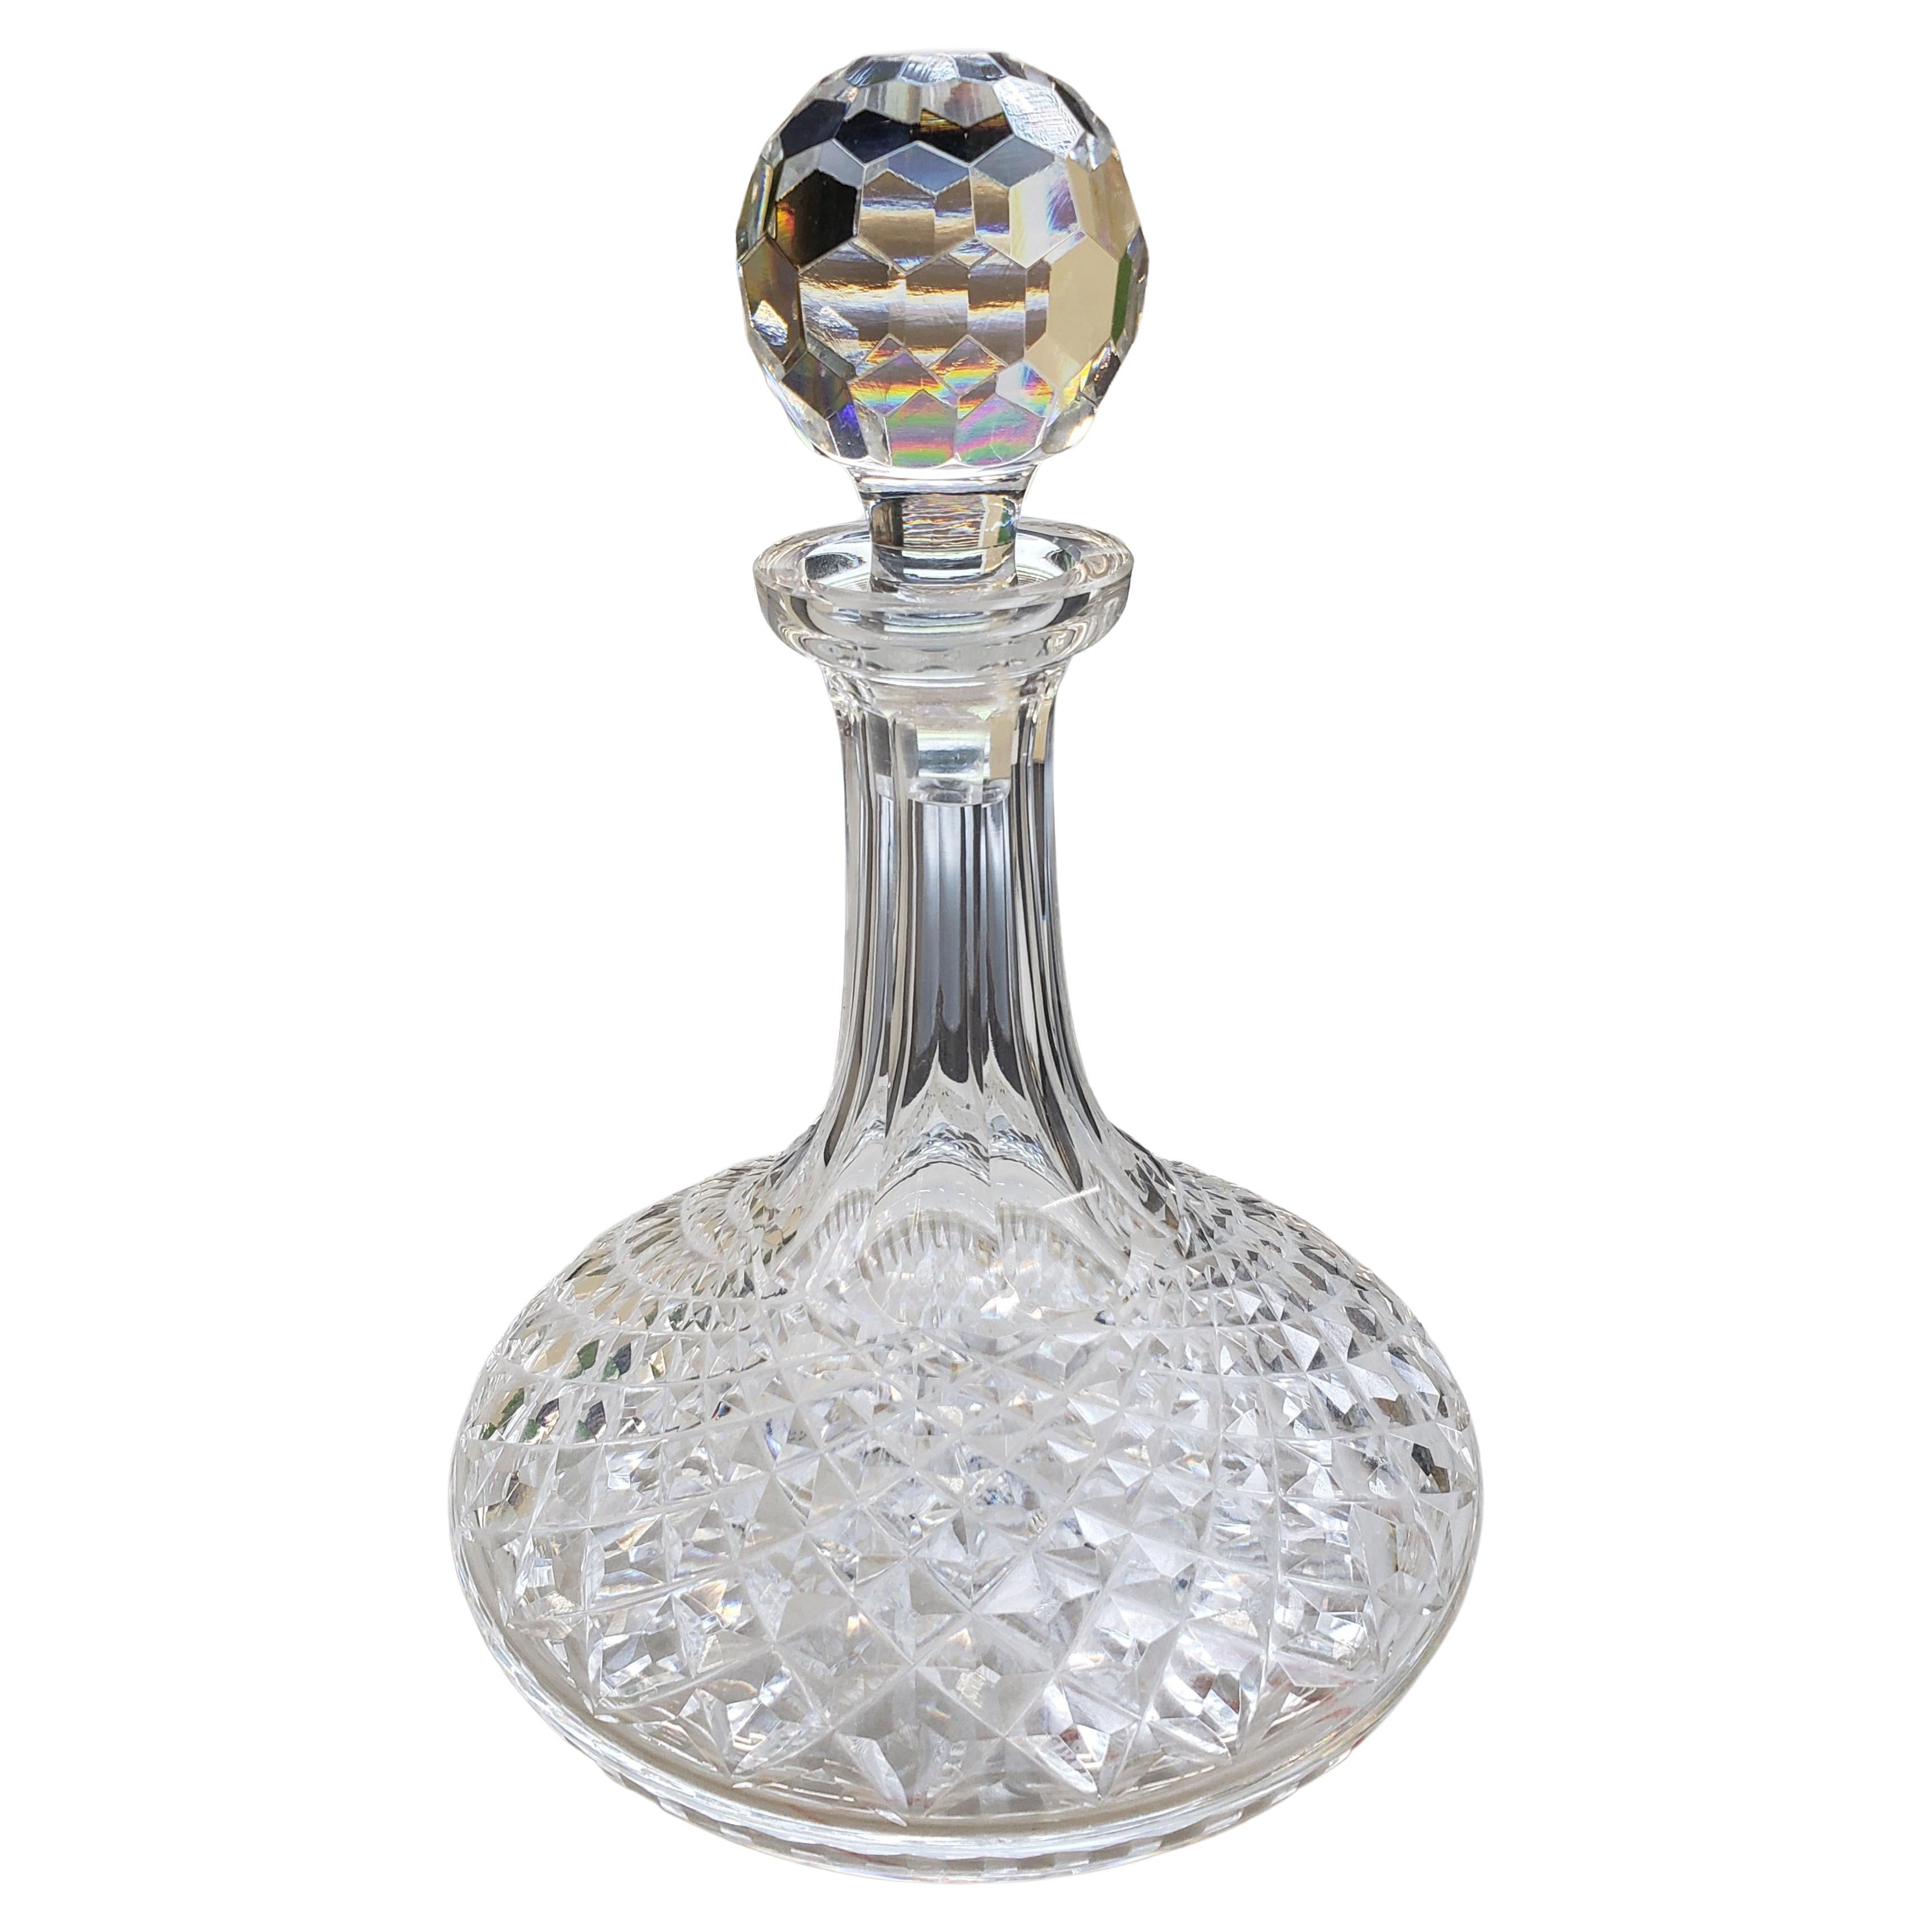 Is any Waterford crystal still made in Ireland? - Questions & Answers